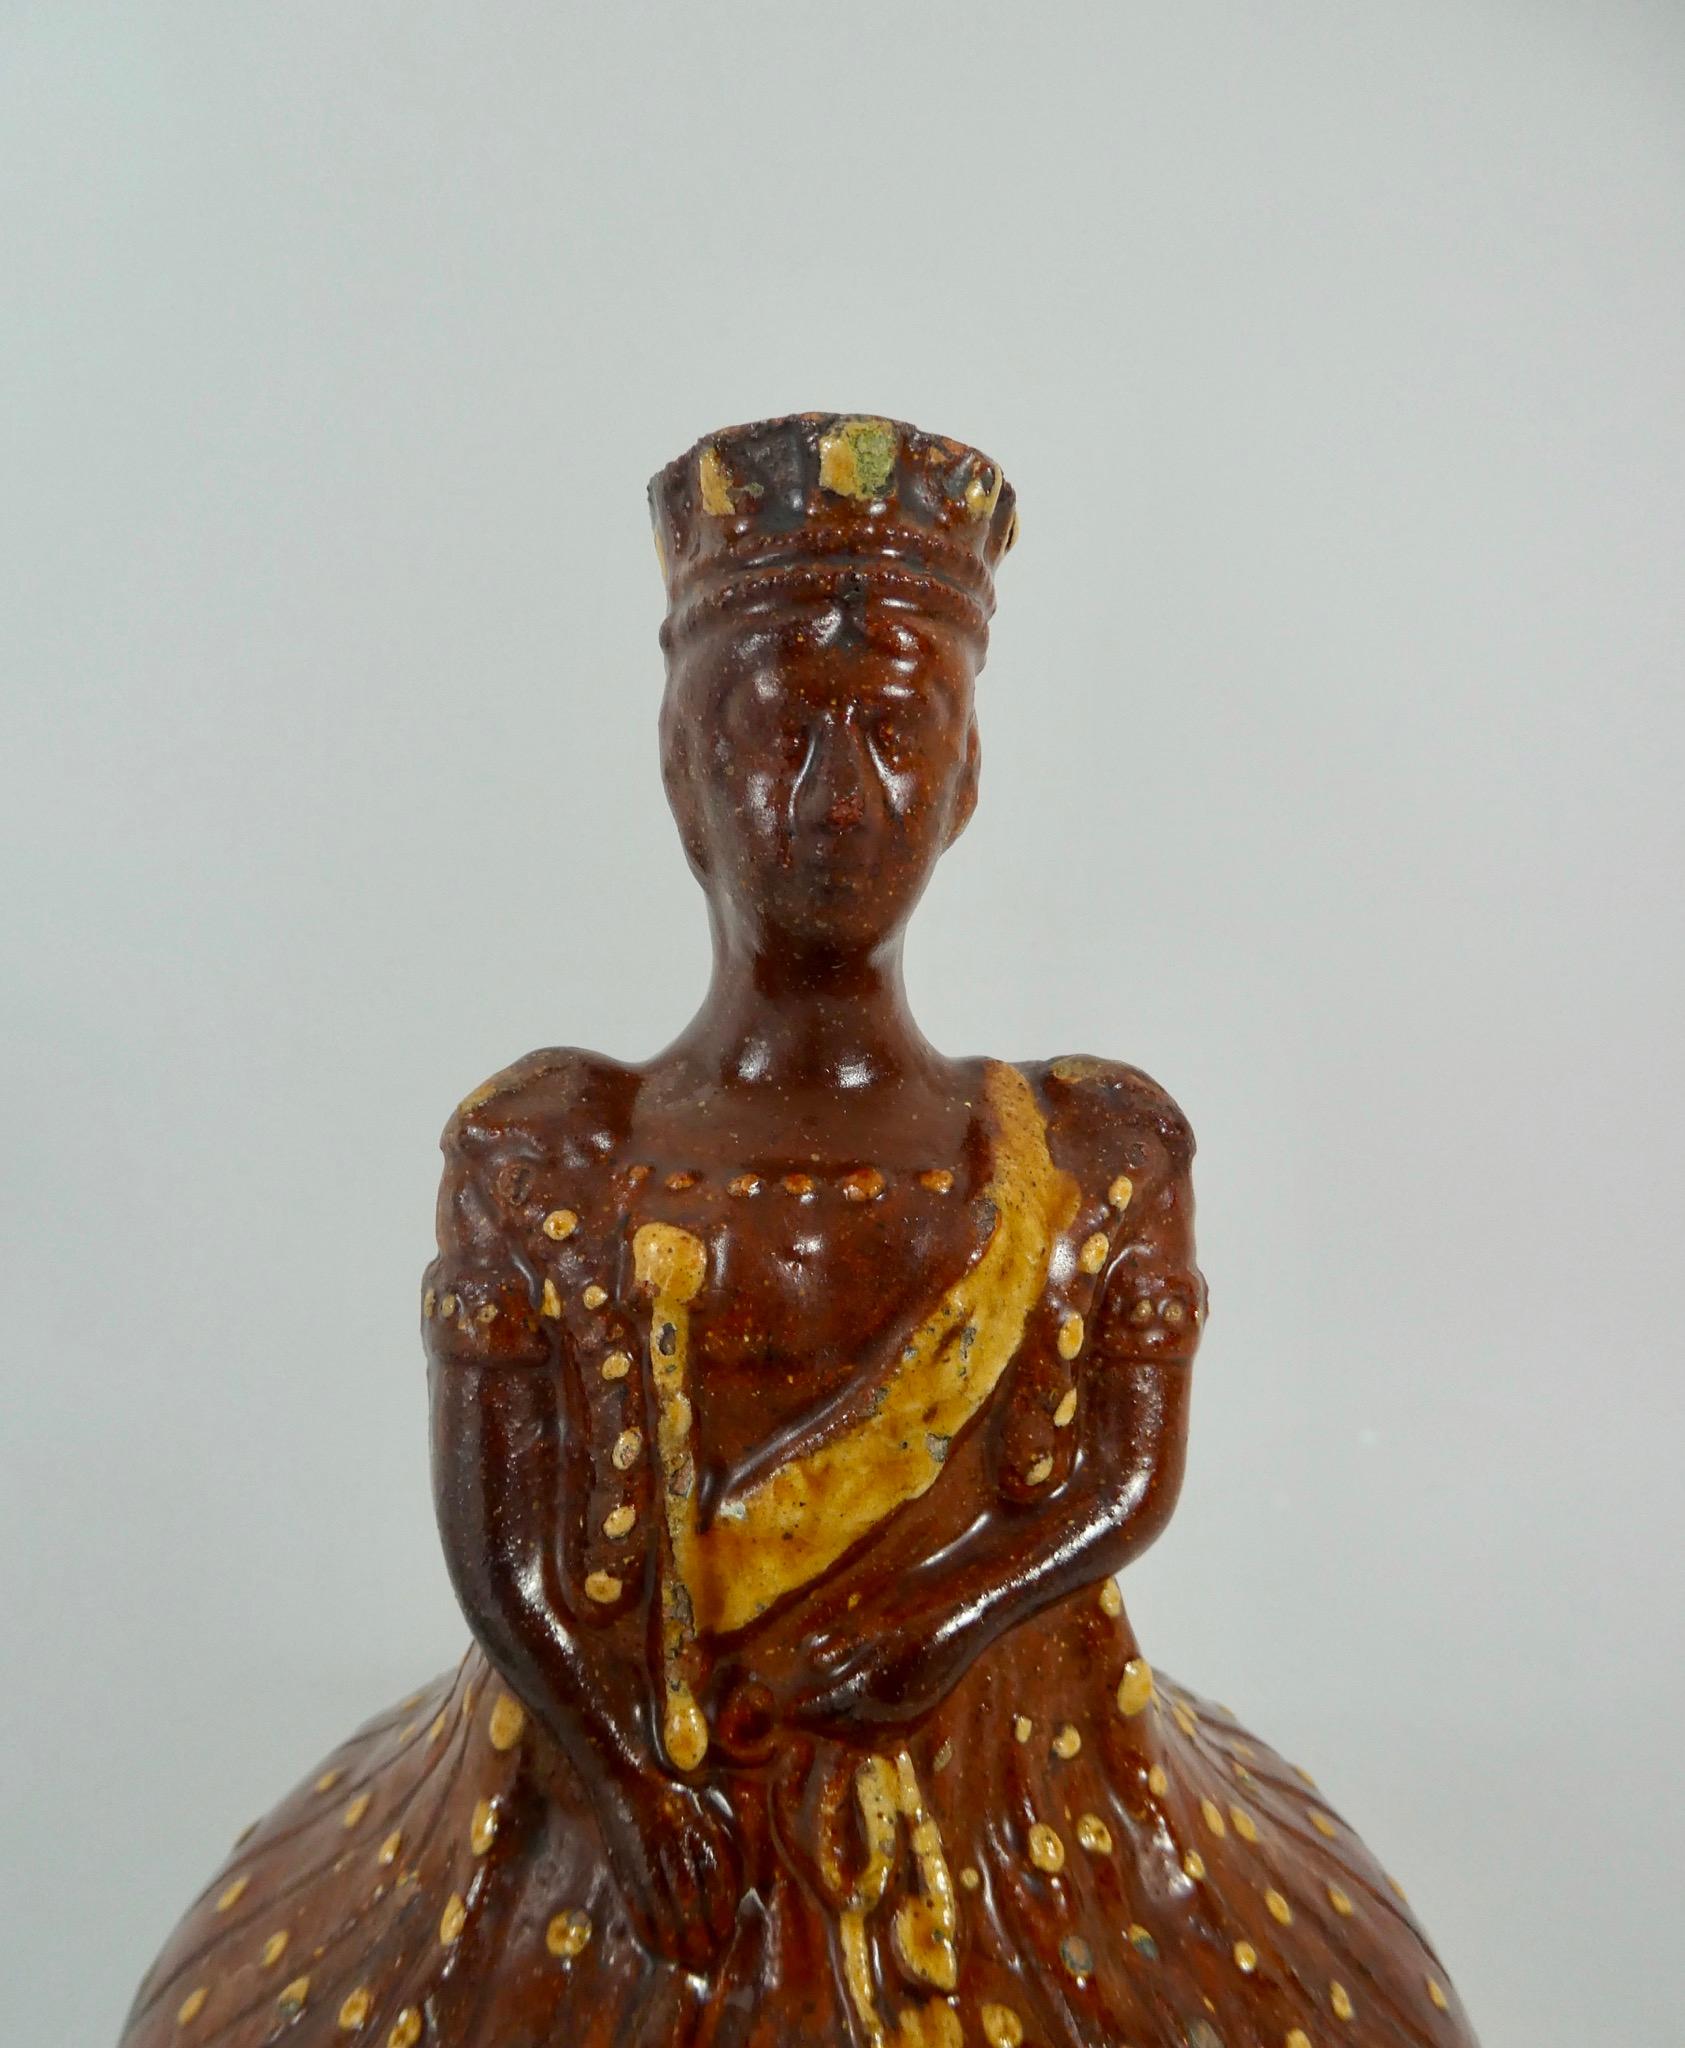 A very rare English pottery slipware flask, circa 1837. Made to commemorate the Coronation of Queen Victoria, after a painting by Sir George Haytor. Modelled with her majesty’s head forming the neck of the flask, and her voluminous gown, the body of